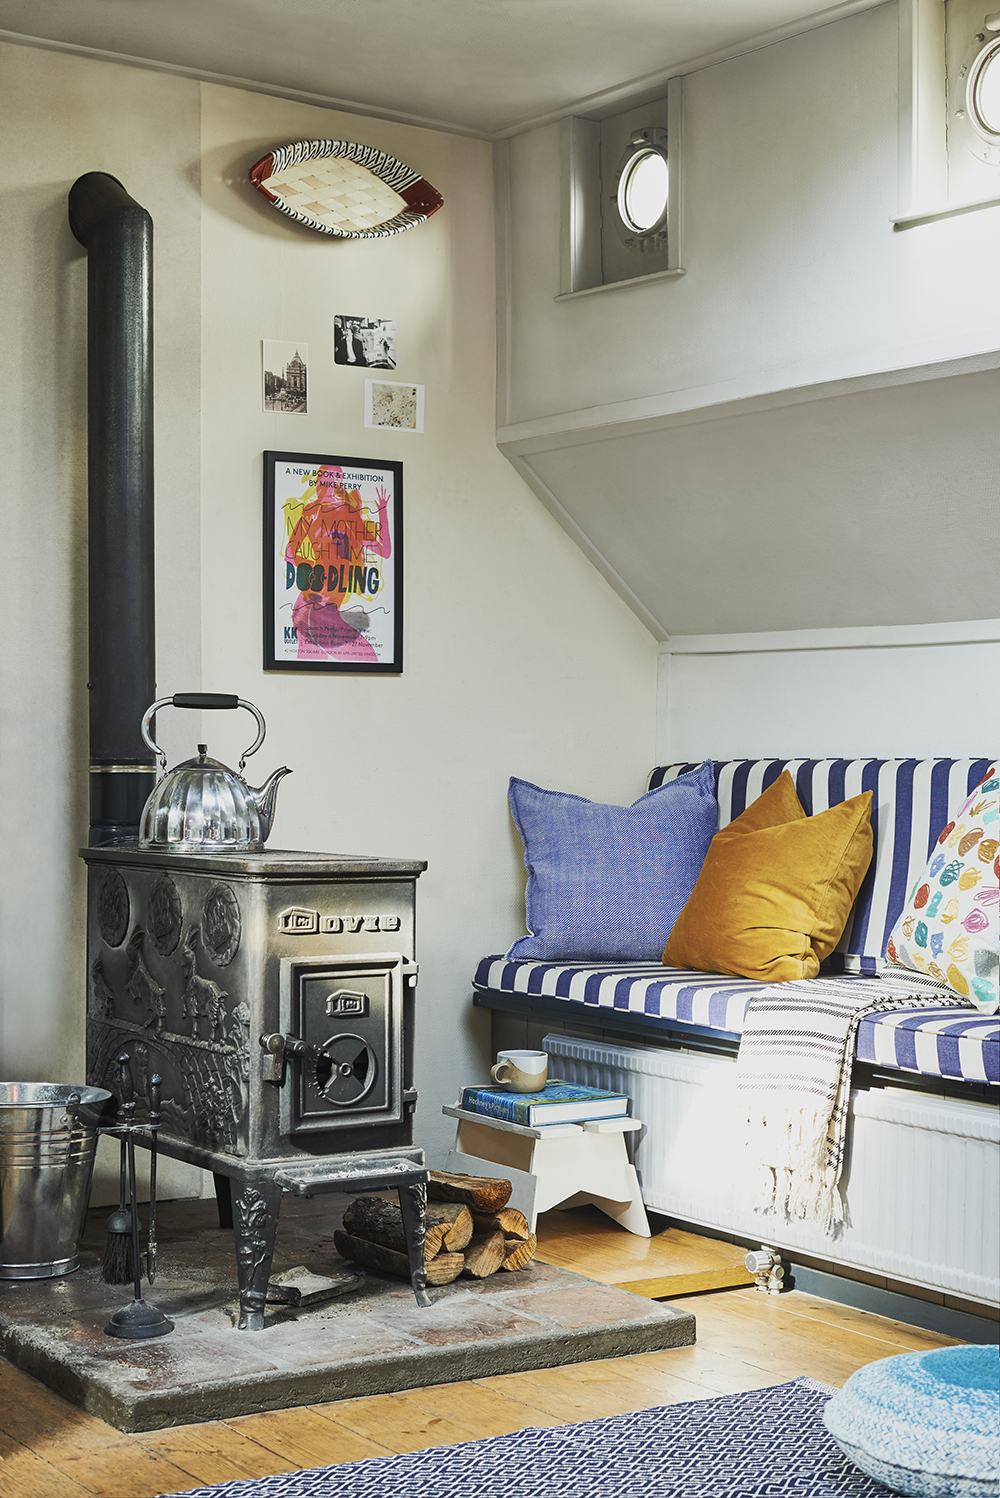 wood-burning stove in London house boat